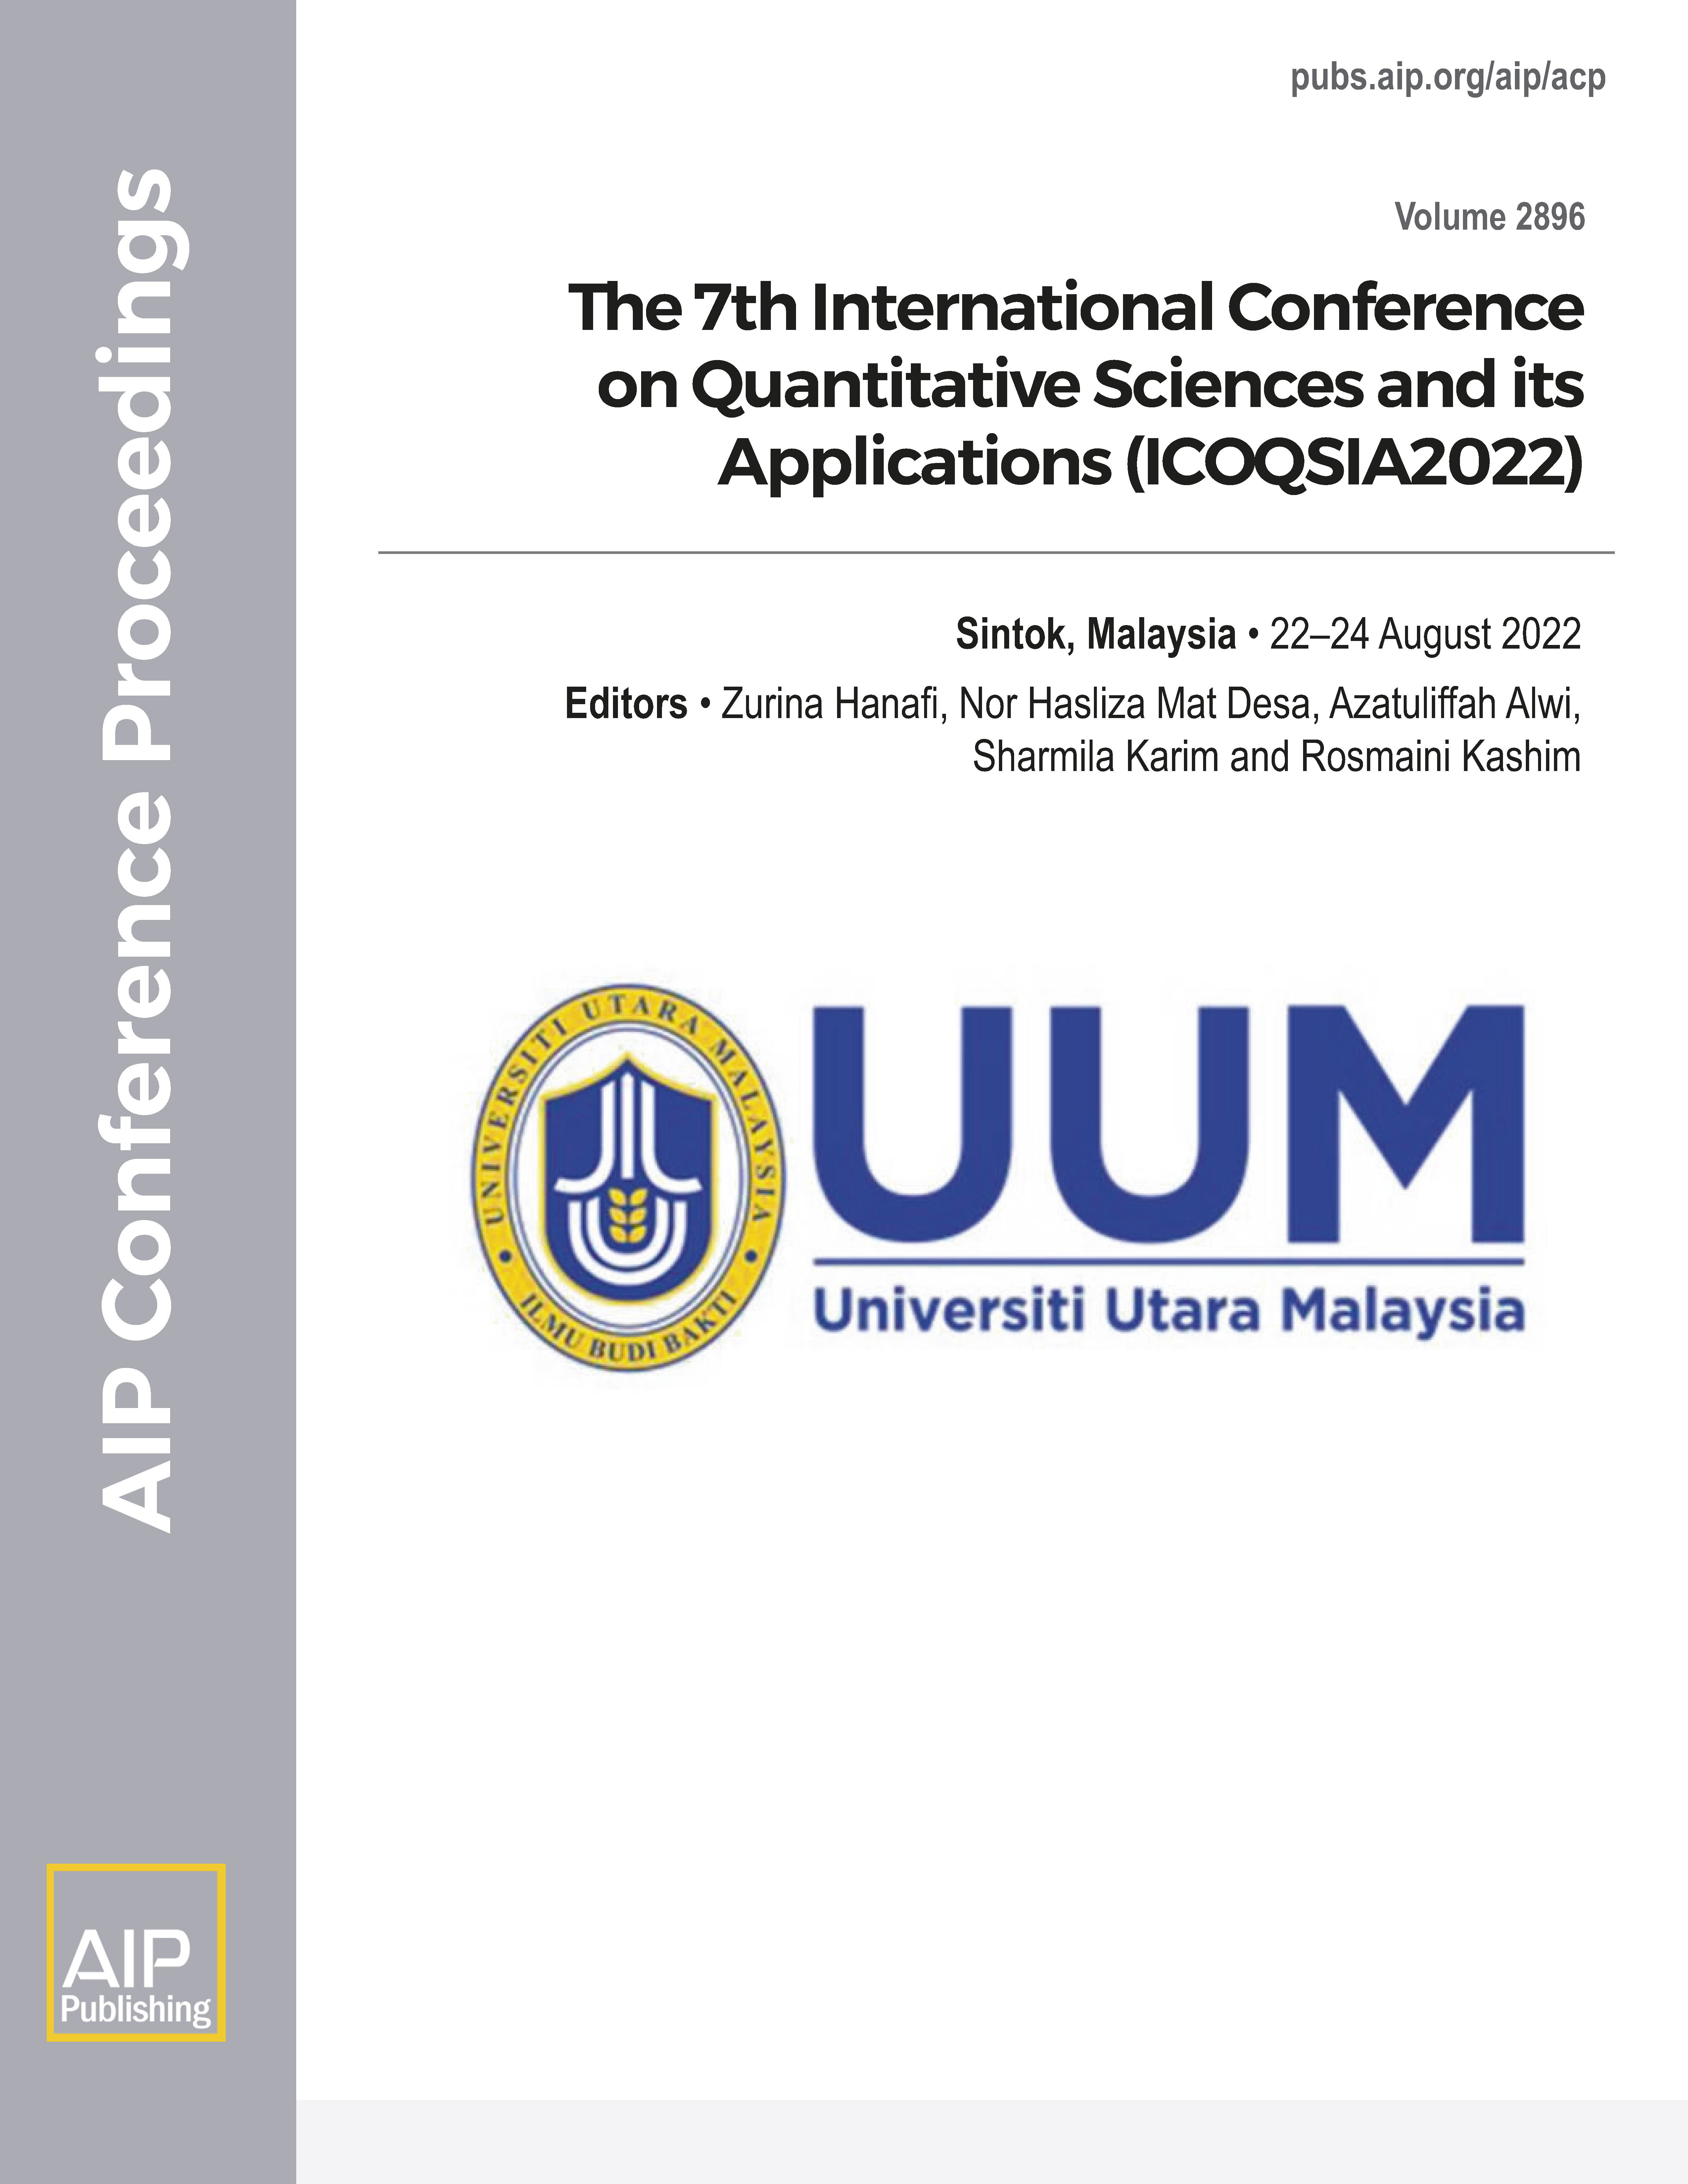 AIP Conference Proceedings of the 7th International Conference on Quantitative Sciences and its Applications (ICOQSIA 2022)